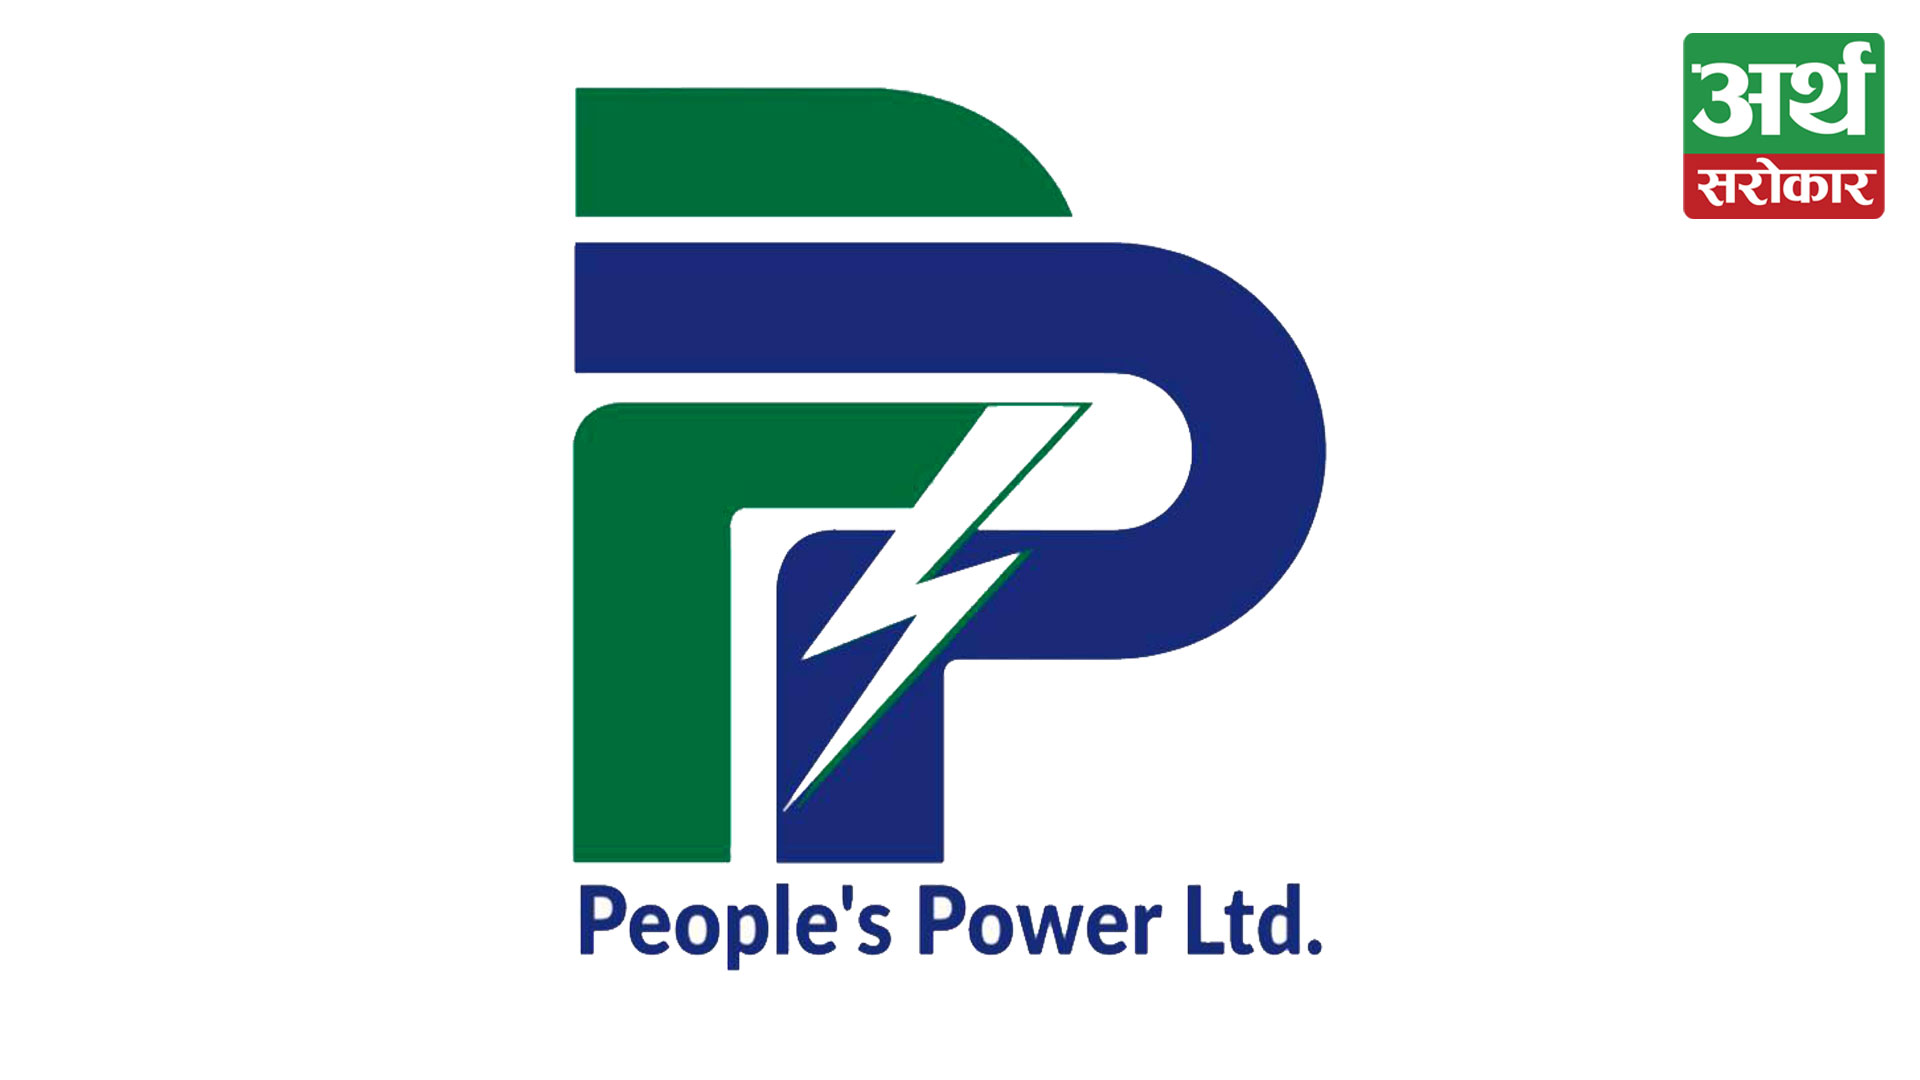 People’s Power decided to issue 50% rights shares